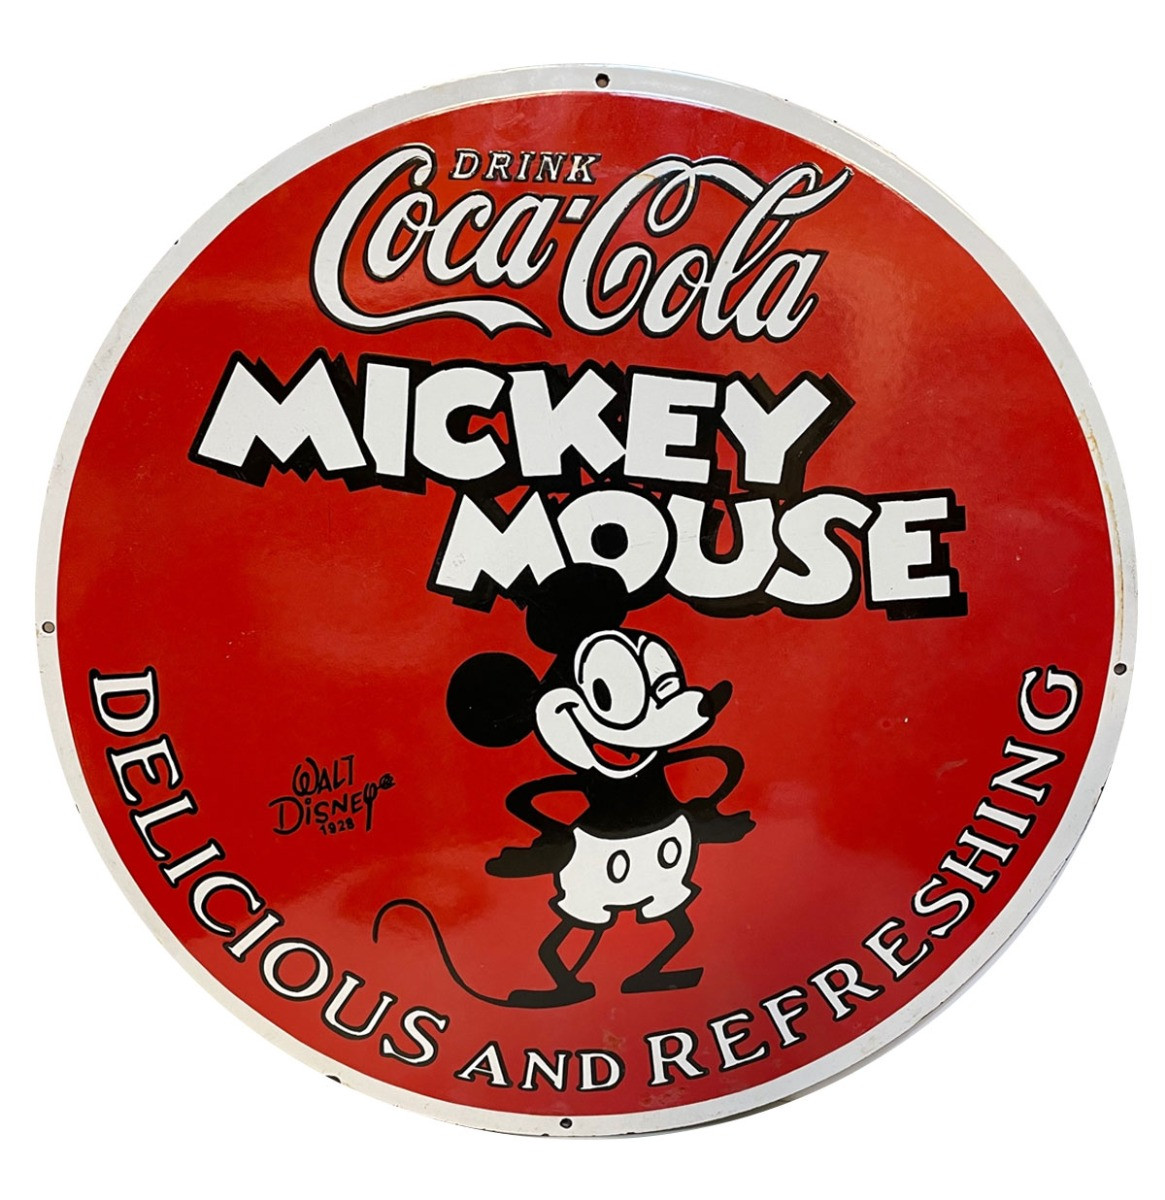 Coca-Cola Mickey Mouse Zwaar Emaille Bord 76 cm - Oudere Repro